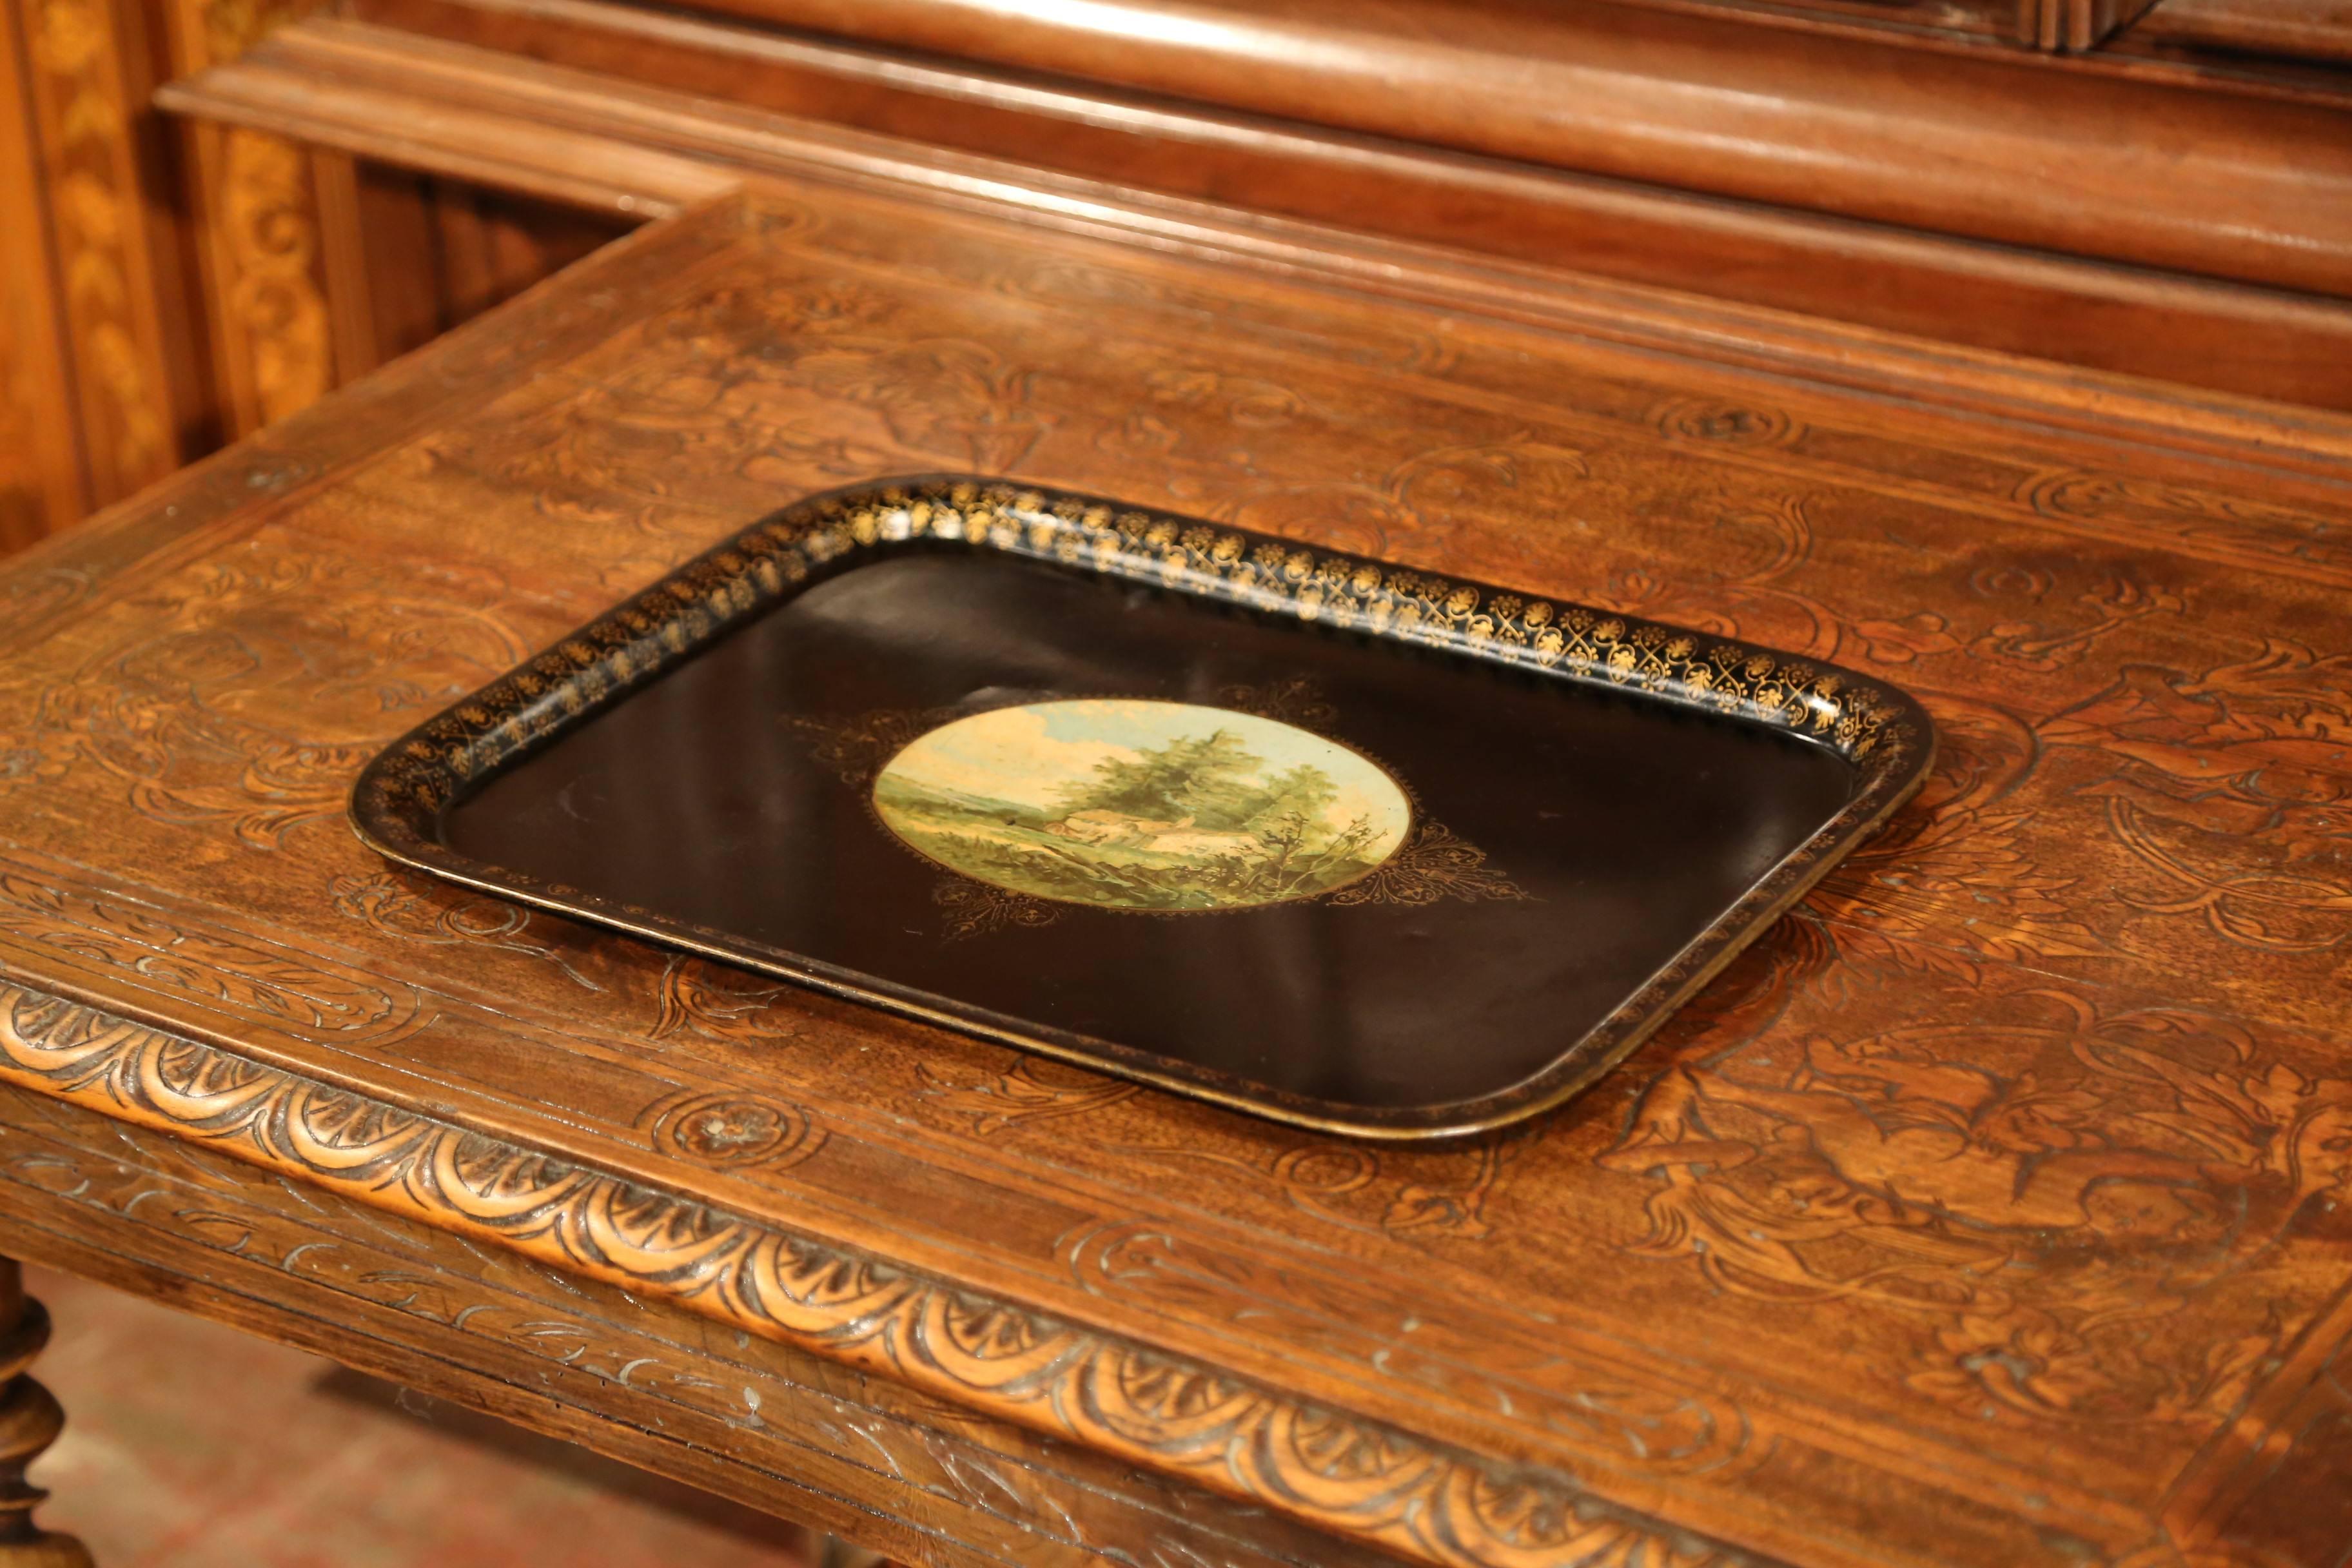 This elegant antique tray was created in France, circa 1870, rectangular in shape, the black tole platter is embellished by hand painted gilt decor around the lip, and features a colorful oval pastoral scene medallion in the center. The peaceful